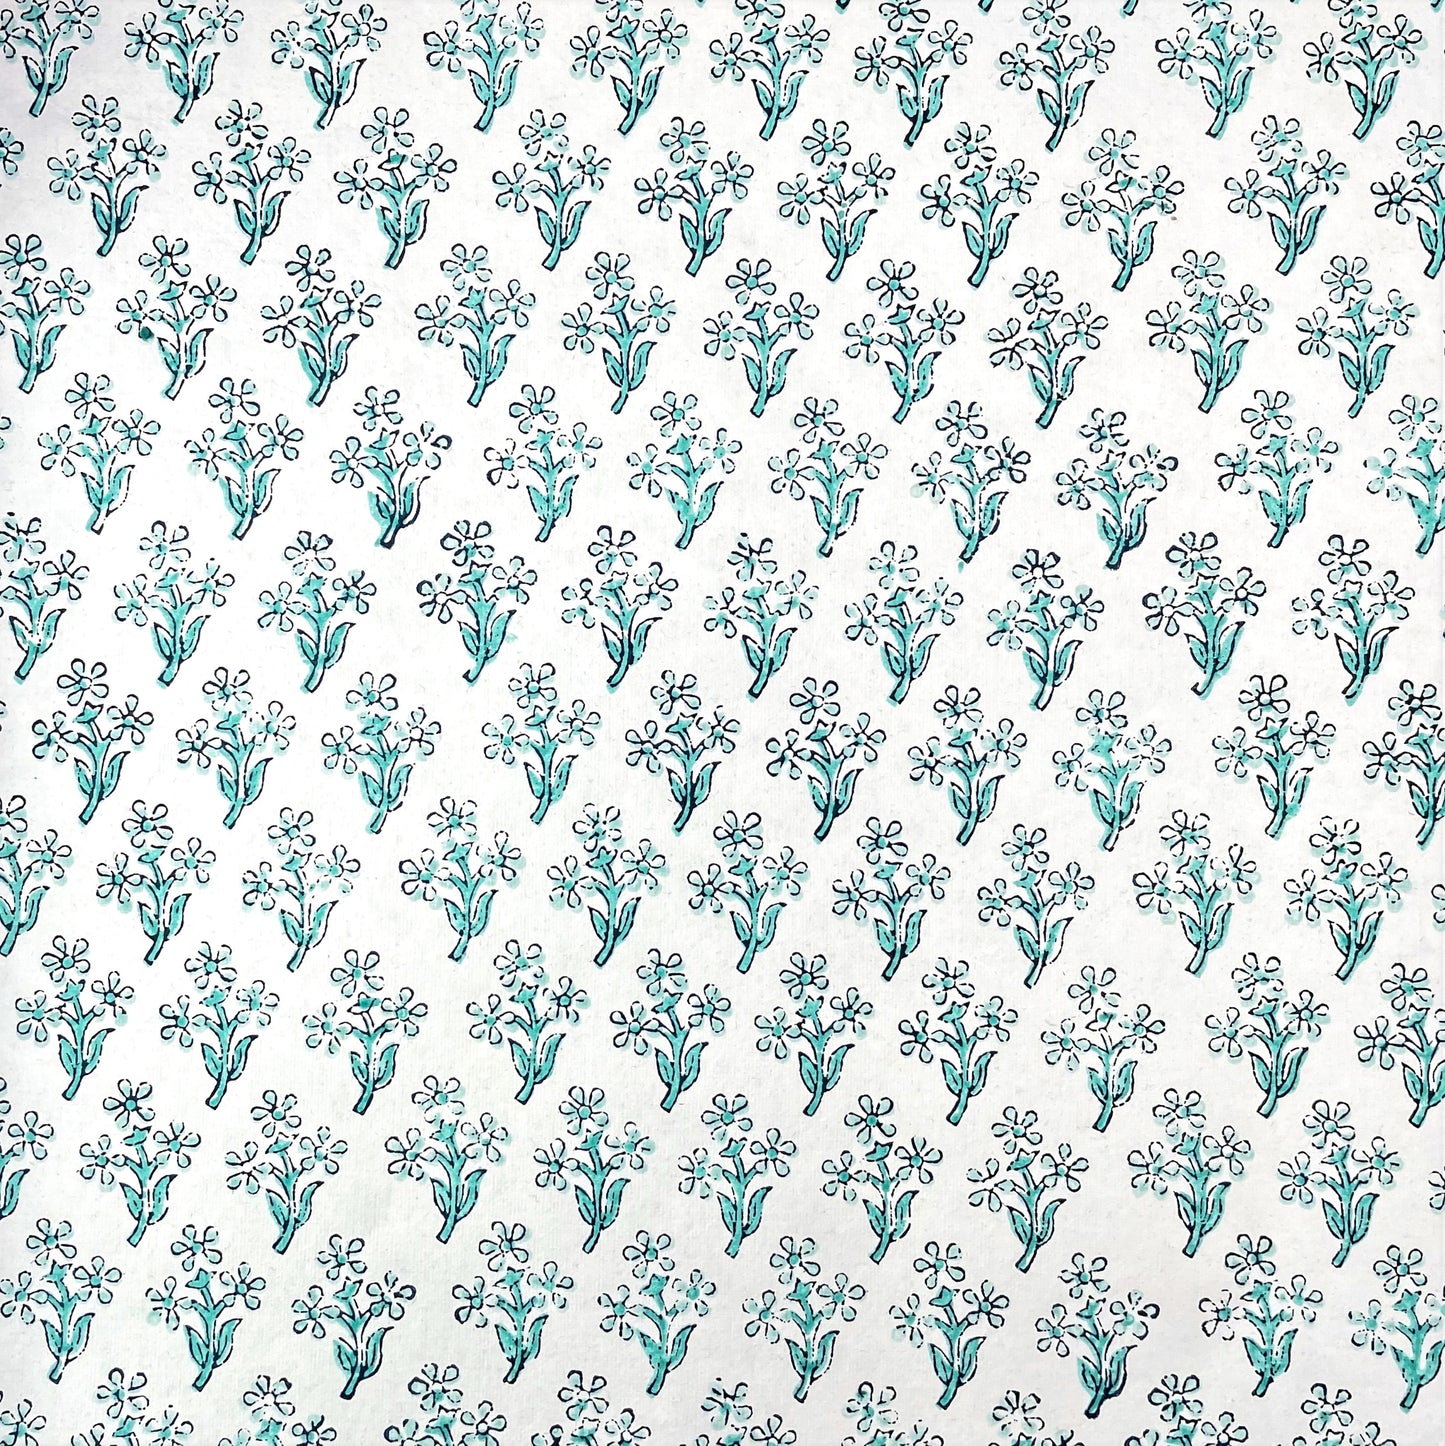 wrapping paper with repeat block print little floral pattern in aqua by Paper Mirchi